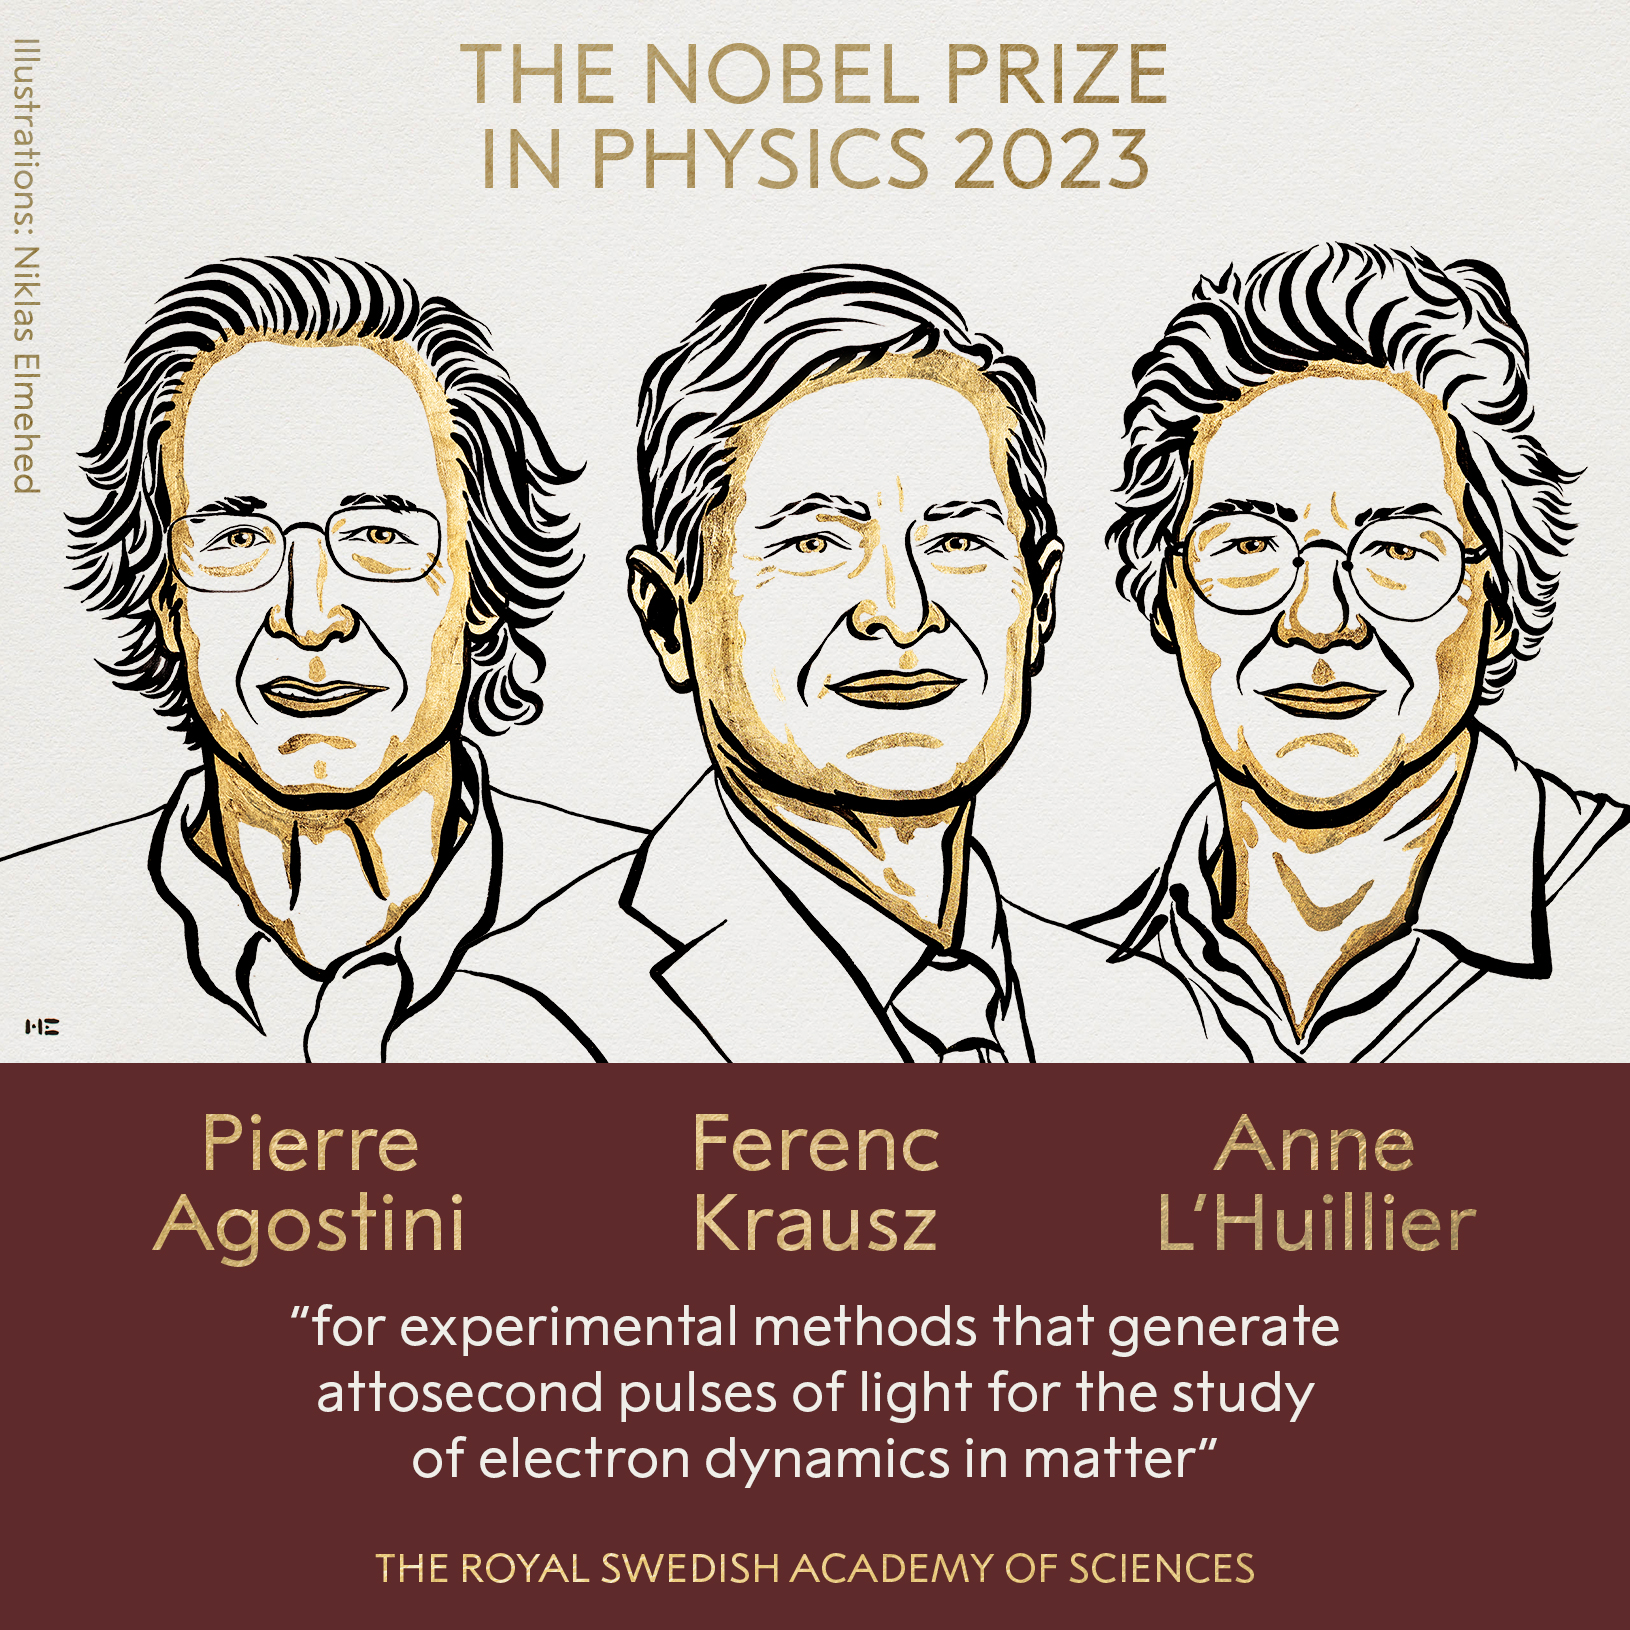 3 scientists awarded 2023 Nobel Prize in Physics for use of light to study electrons